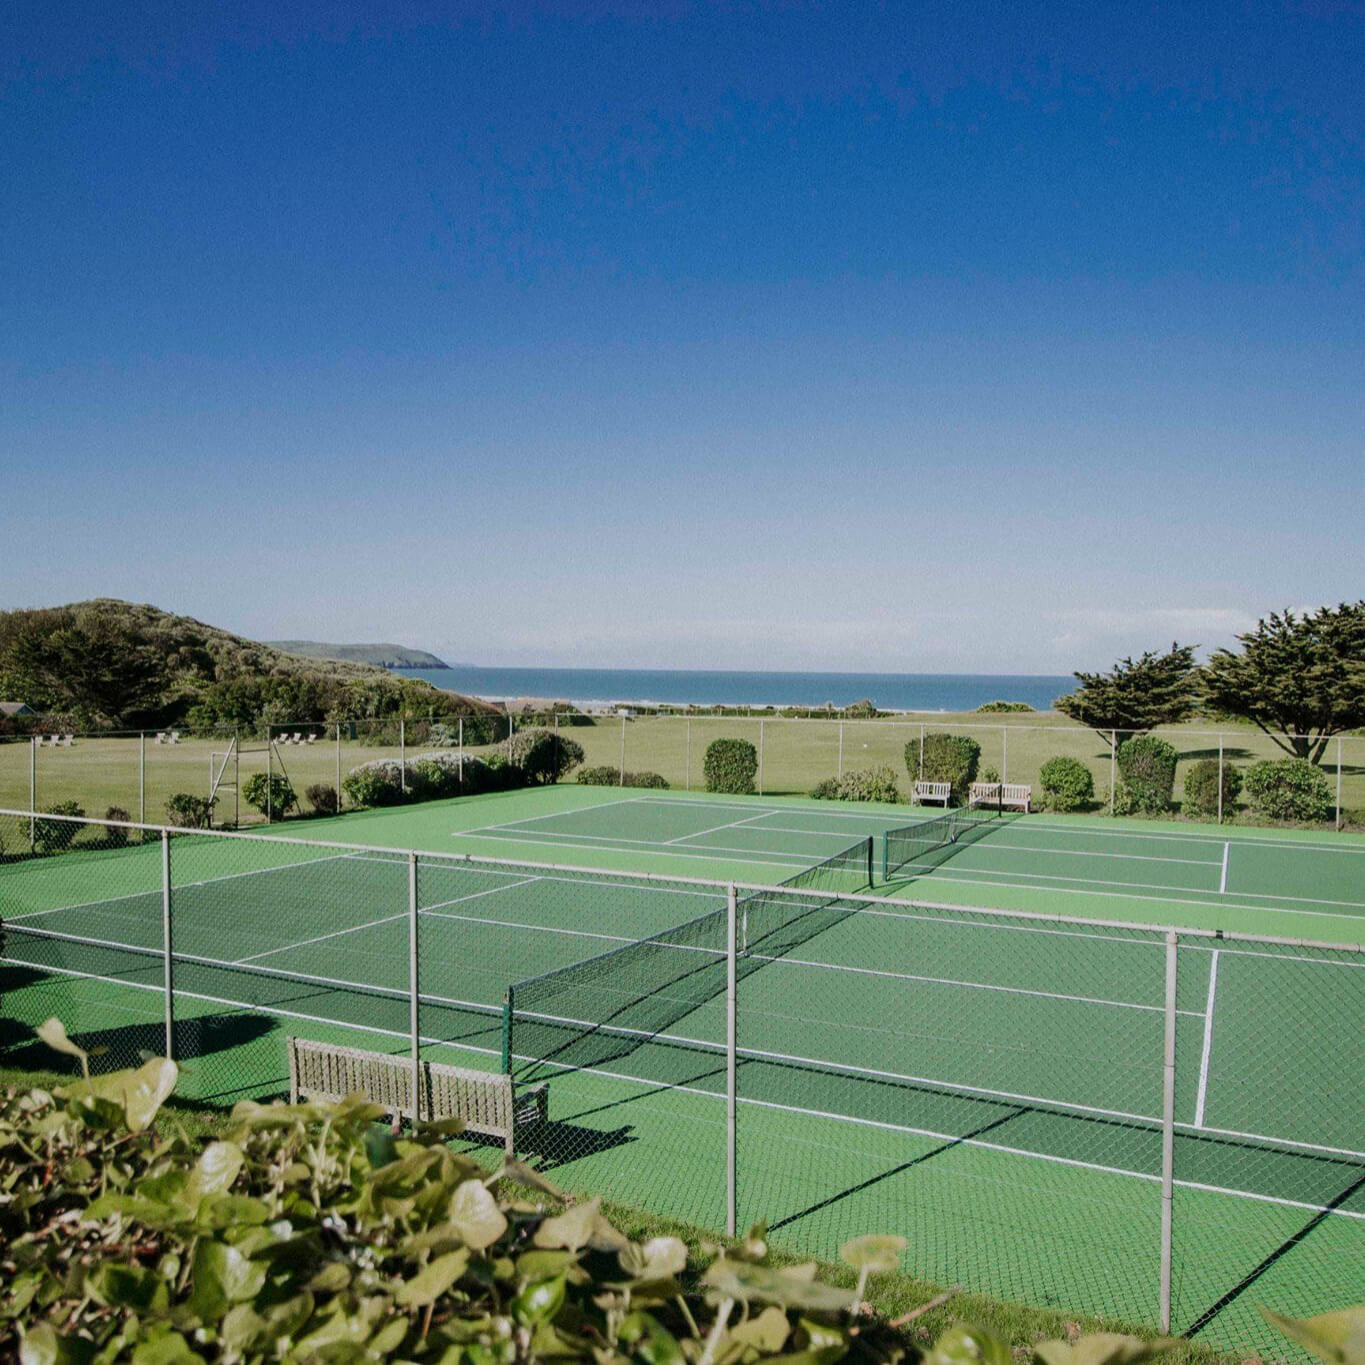 Tennis courts with views of the coast